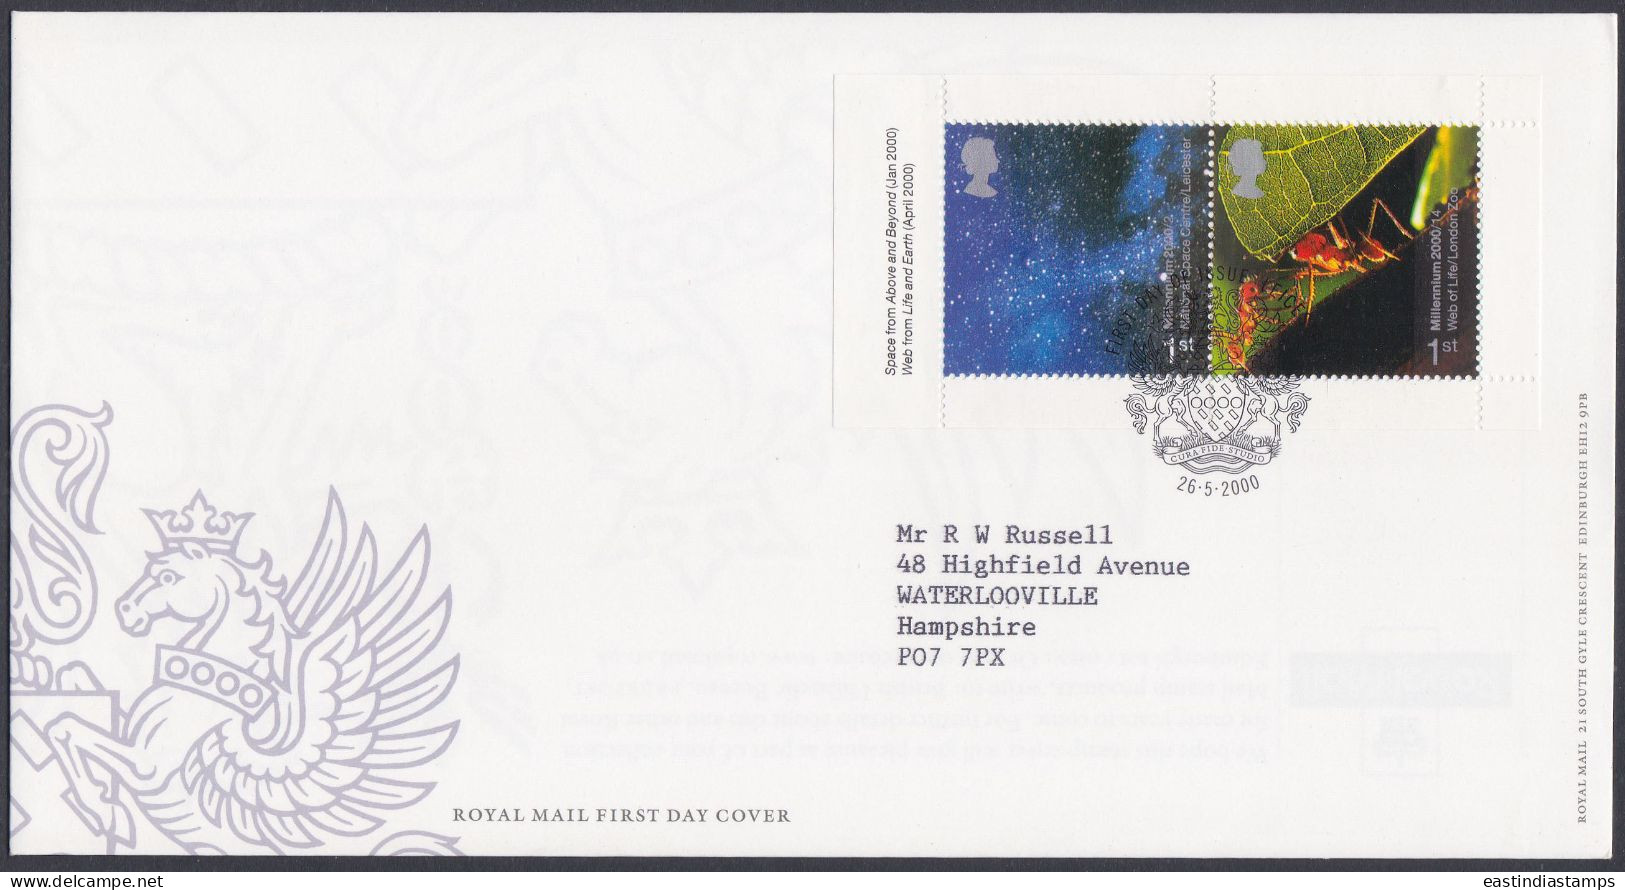 GB Great Britain 2000 FDC Space, Stars, Ant, Insect, London Zoo, Se-tenant, Pictorial Postmark, First Day Cover - Storia Postale